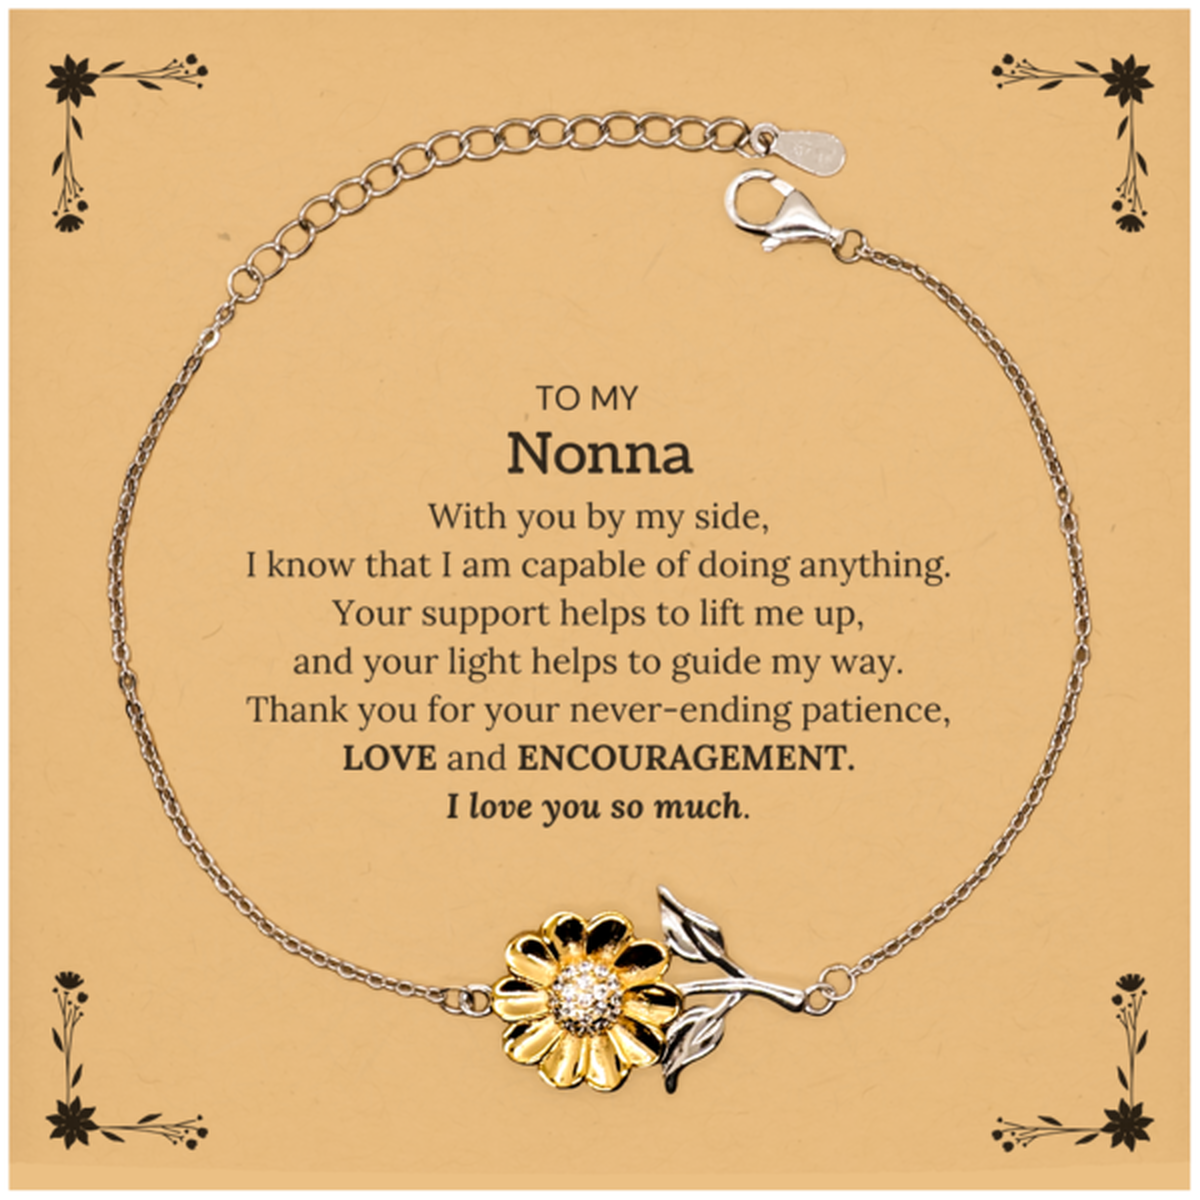 Appreciation Nonna Sunflower Bracelet Gifts, To My Nonna Birthday Christmas Wedding Keepsake Gifts for Nonna With you by my side, I know that I am capable of doing anything. I love you so much